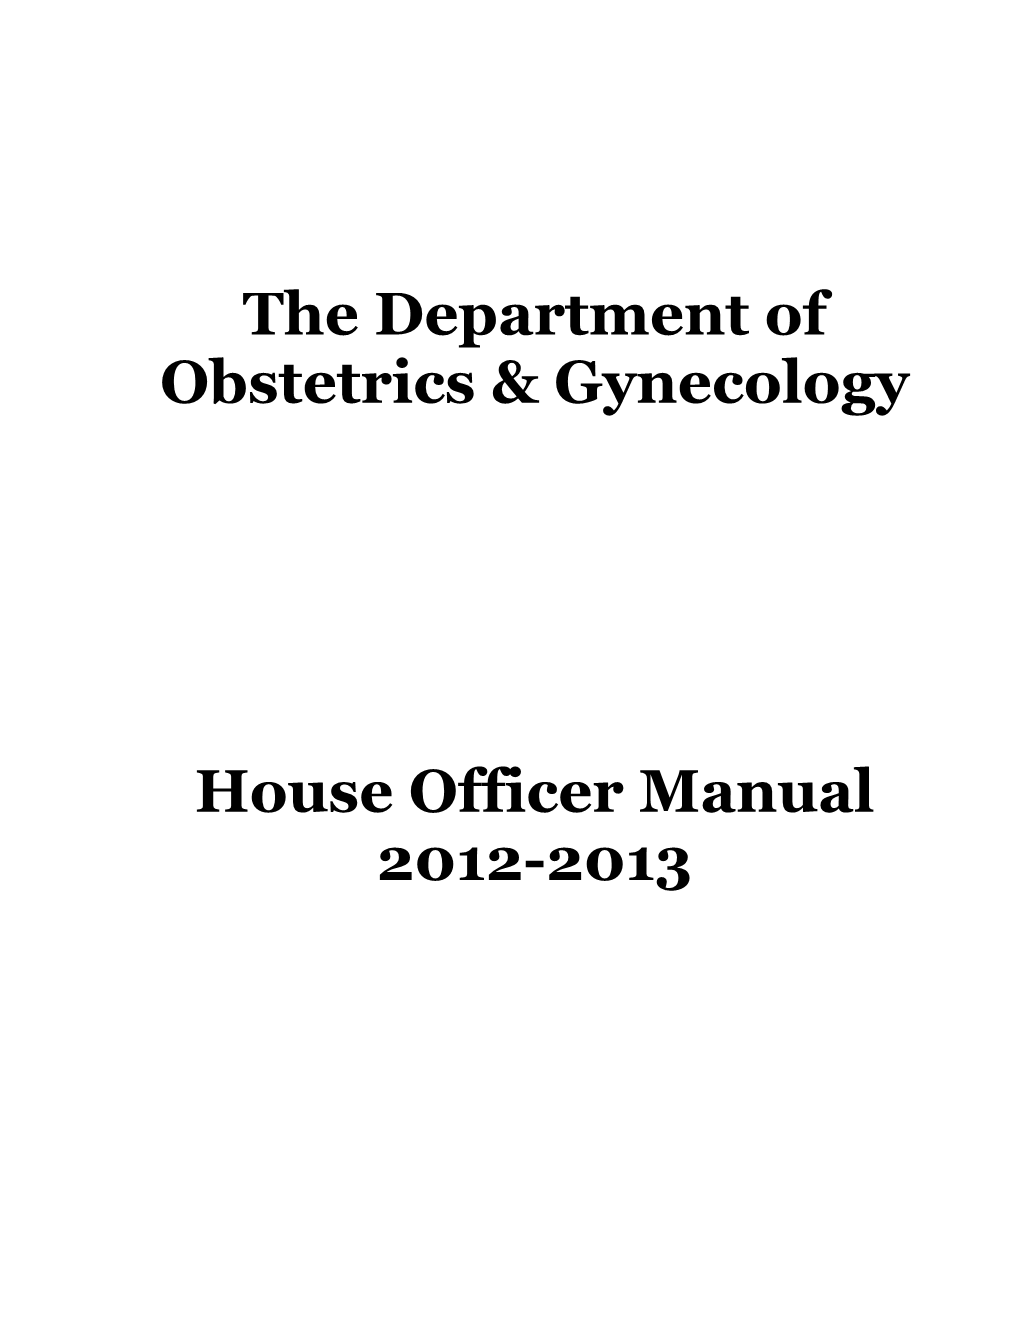 The Department of Obstetrics & Gynecology House Officer Manual 2012-2013